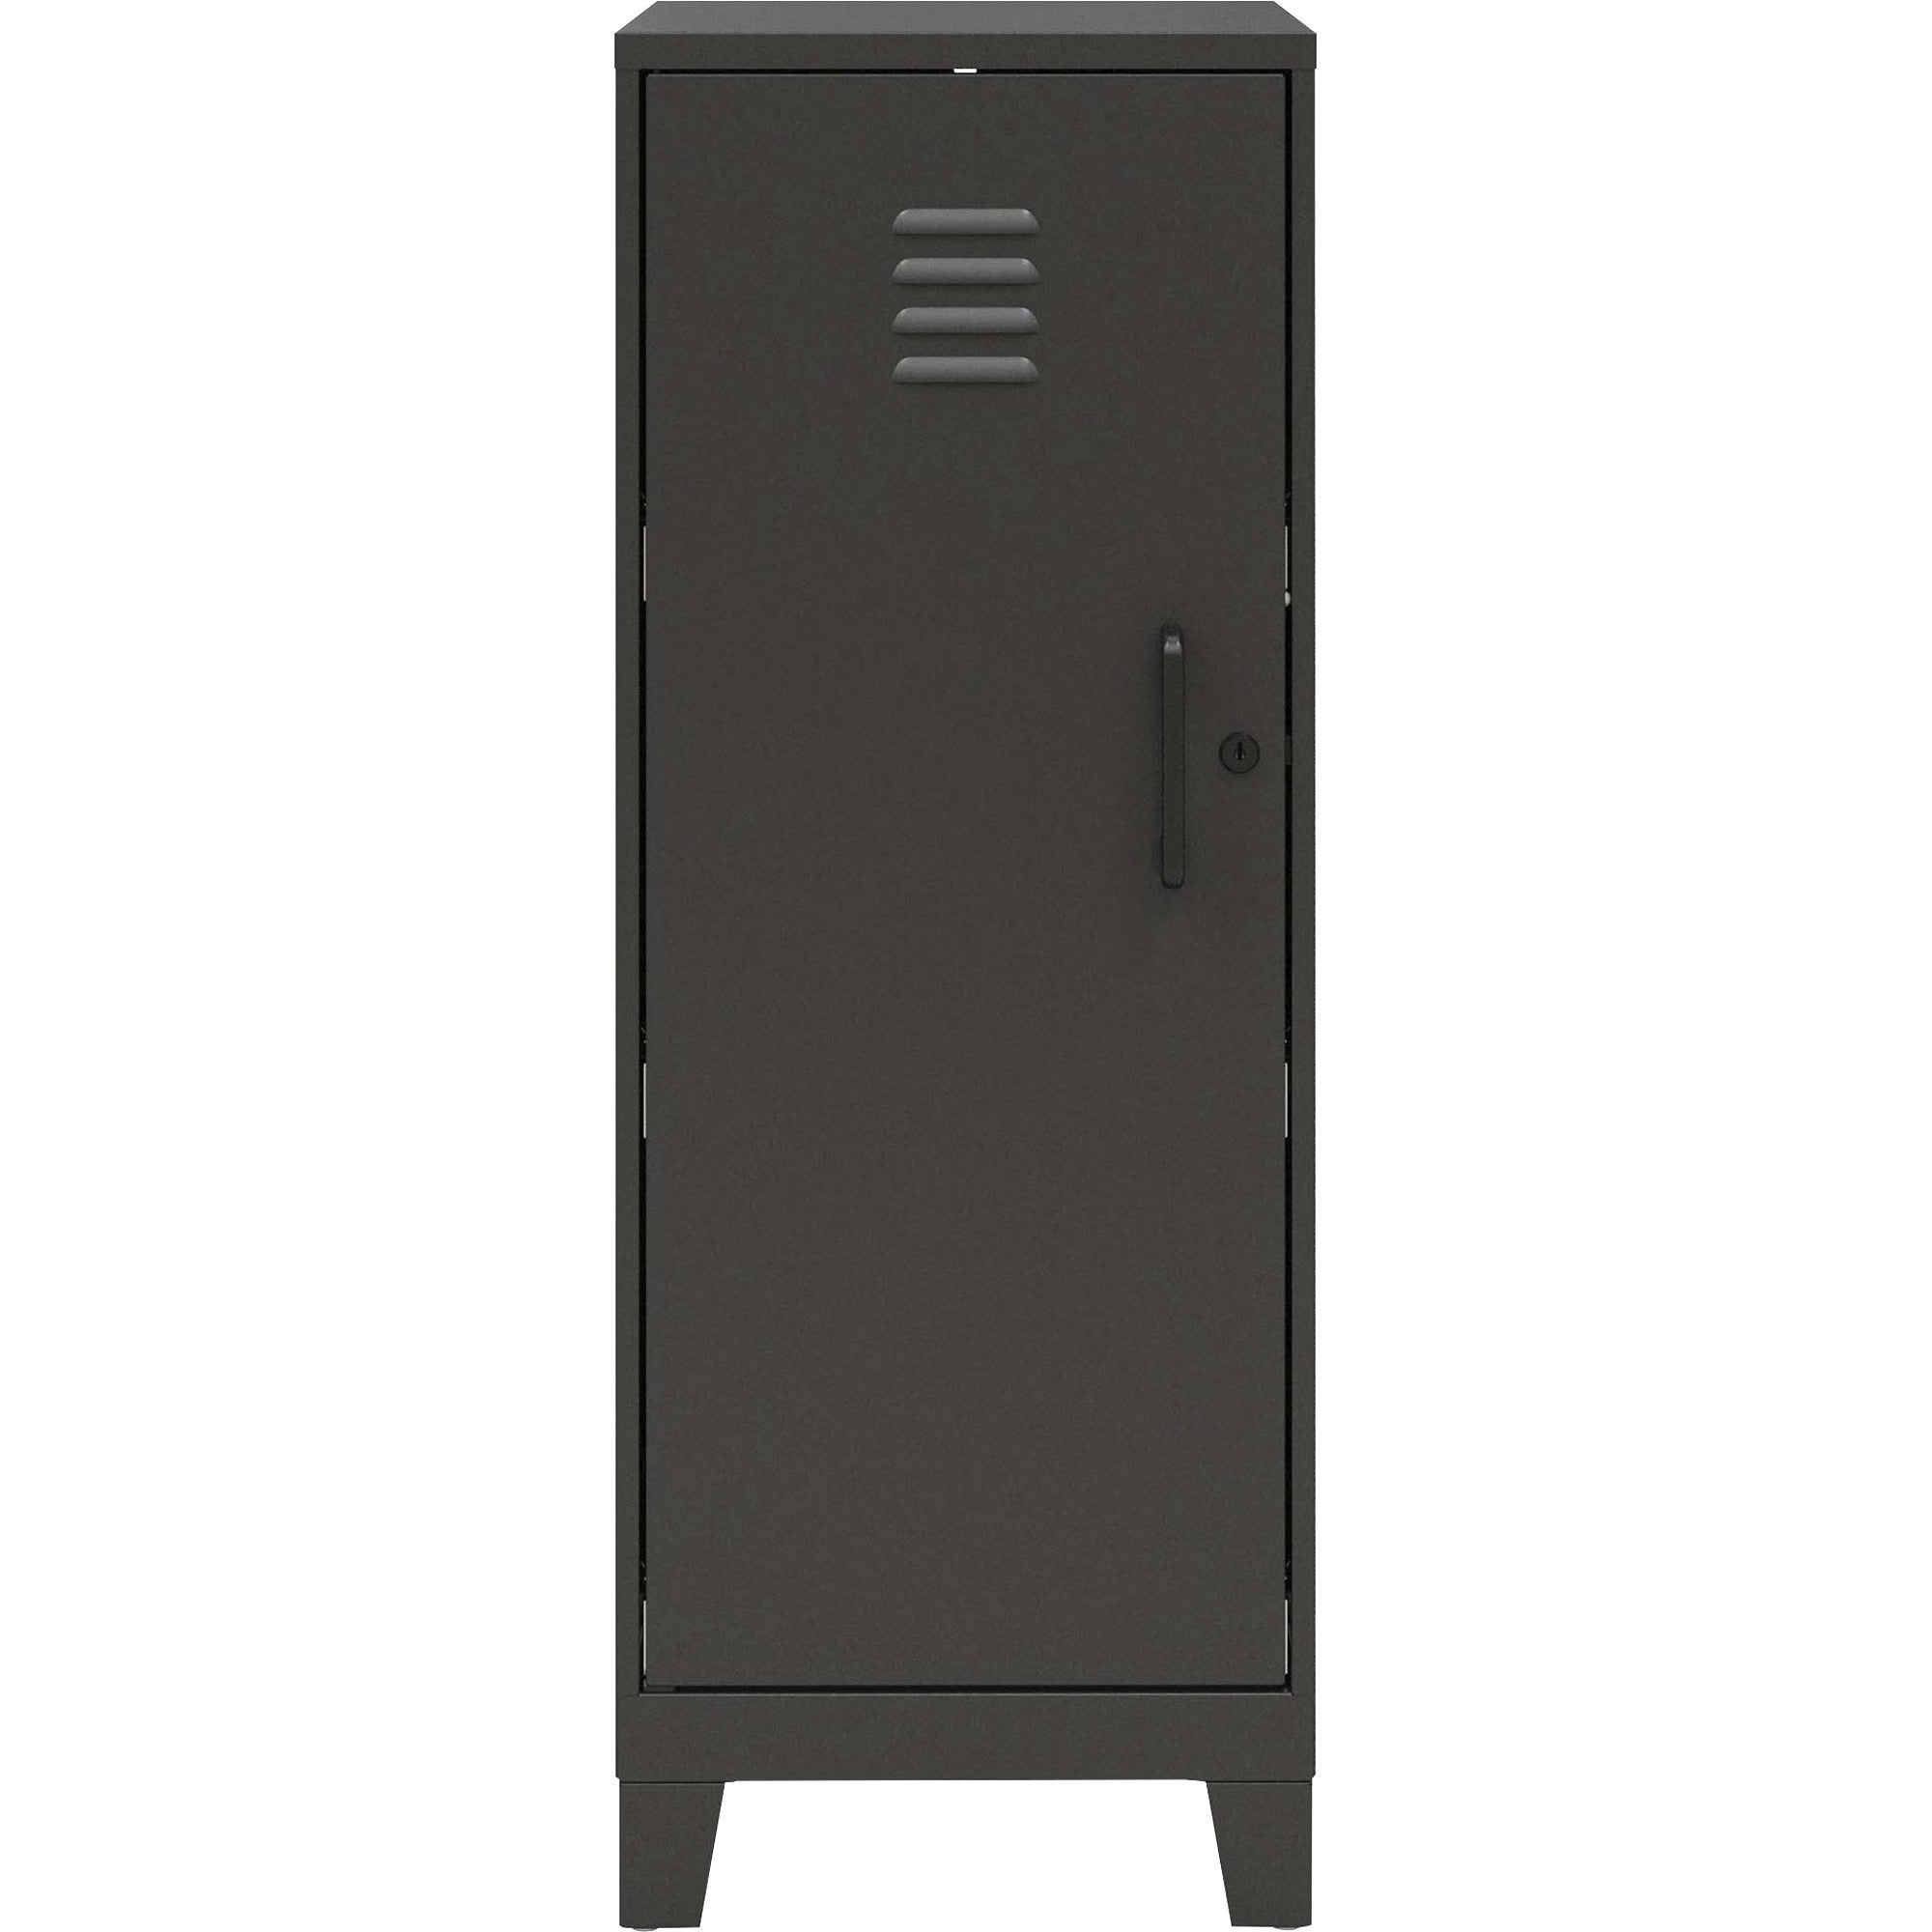 nusparc-personal-locker-3-shelves-for-office-home-sport-equipments-toy-game-classroom-playroom-basement-garage-overall-size-425-x-142-x-18-black-steel-taa-compliant_nprsl318zzbk - 2